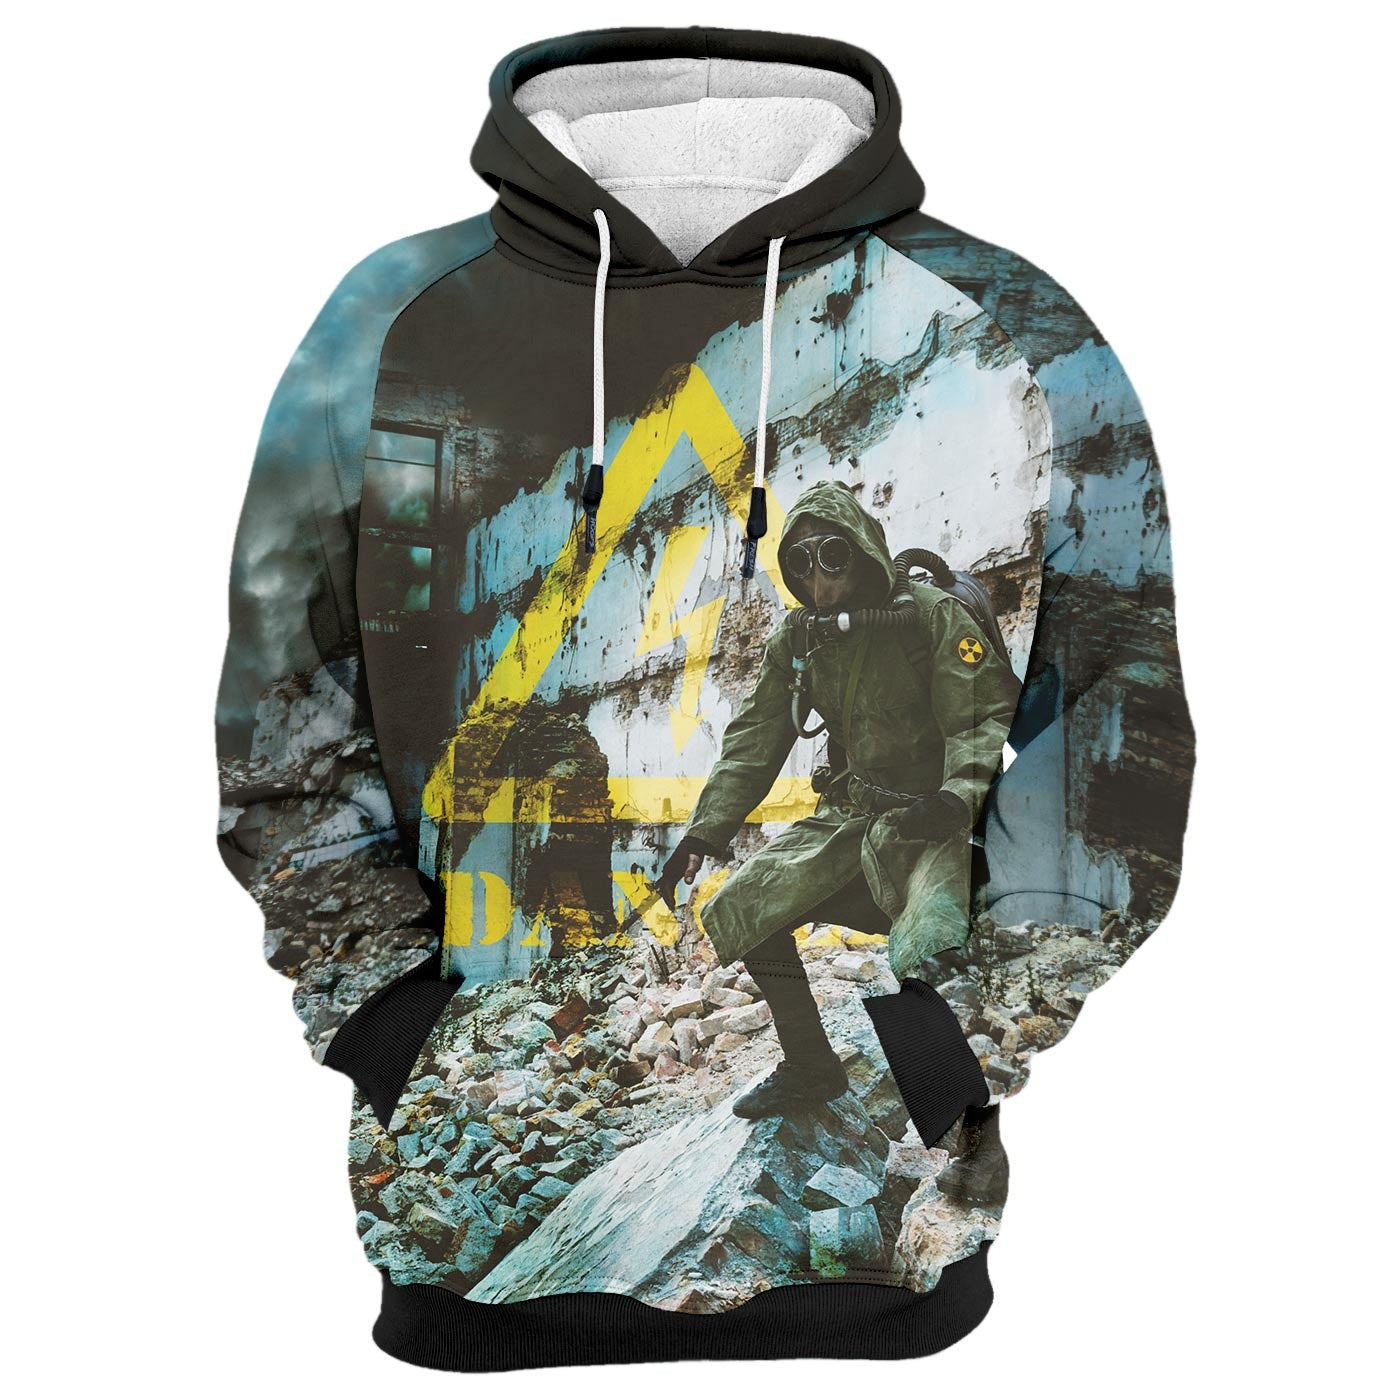 Apocalyptic Soldier Hoodie